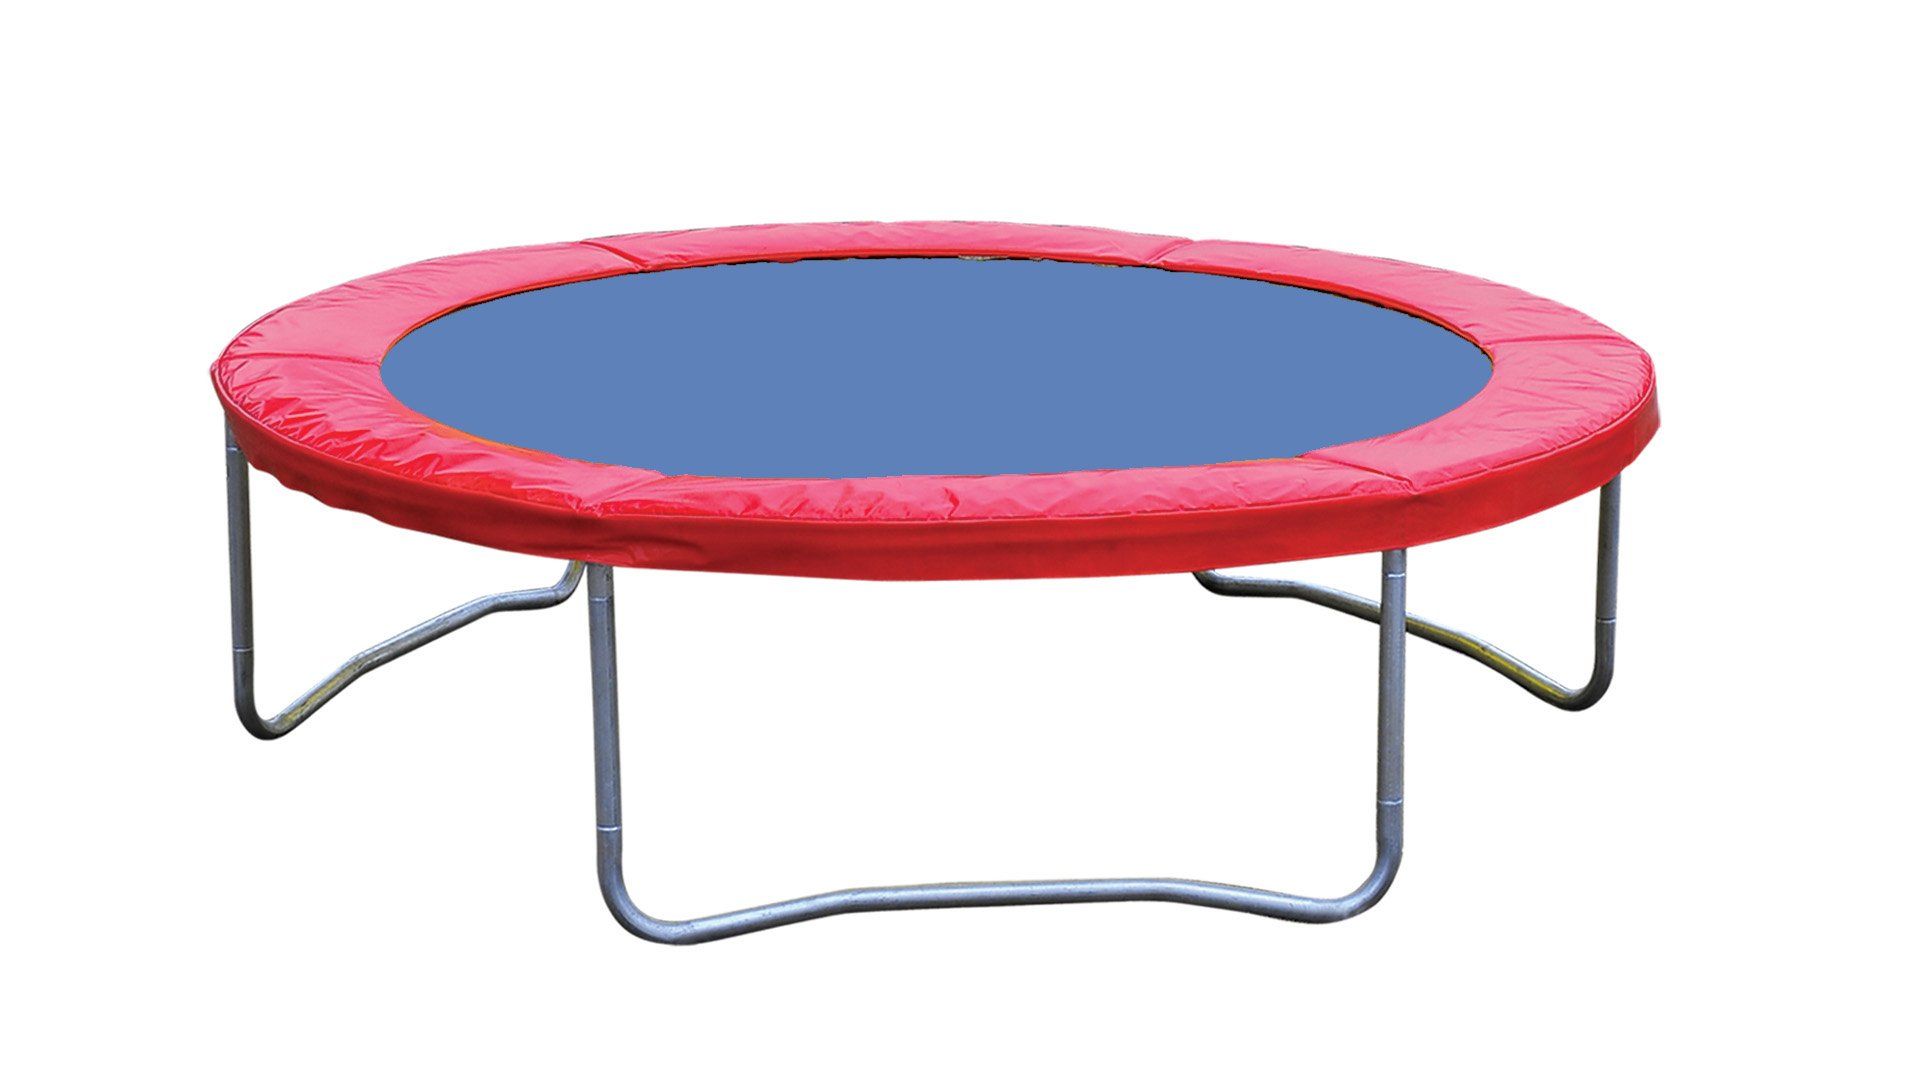 V *TRADE QTY* Brand New Airzone 2.4 m Trampoline (colours may vary) ISP71.99 (Ebay) X 10 YOUR BID